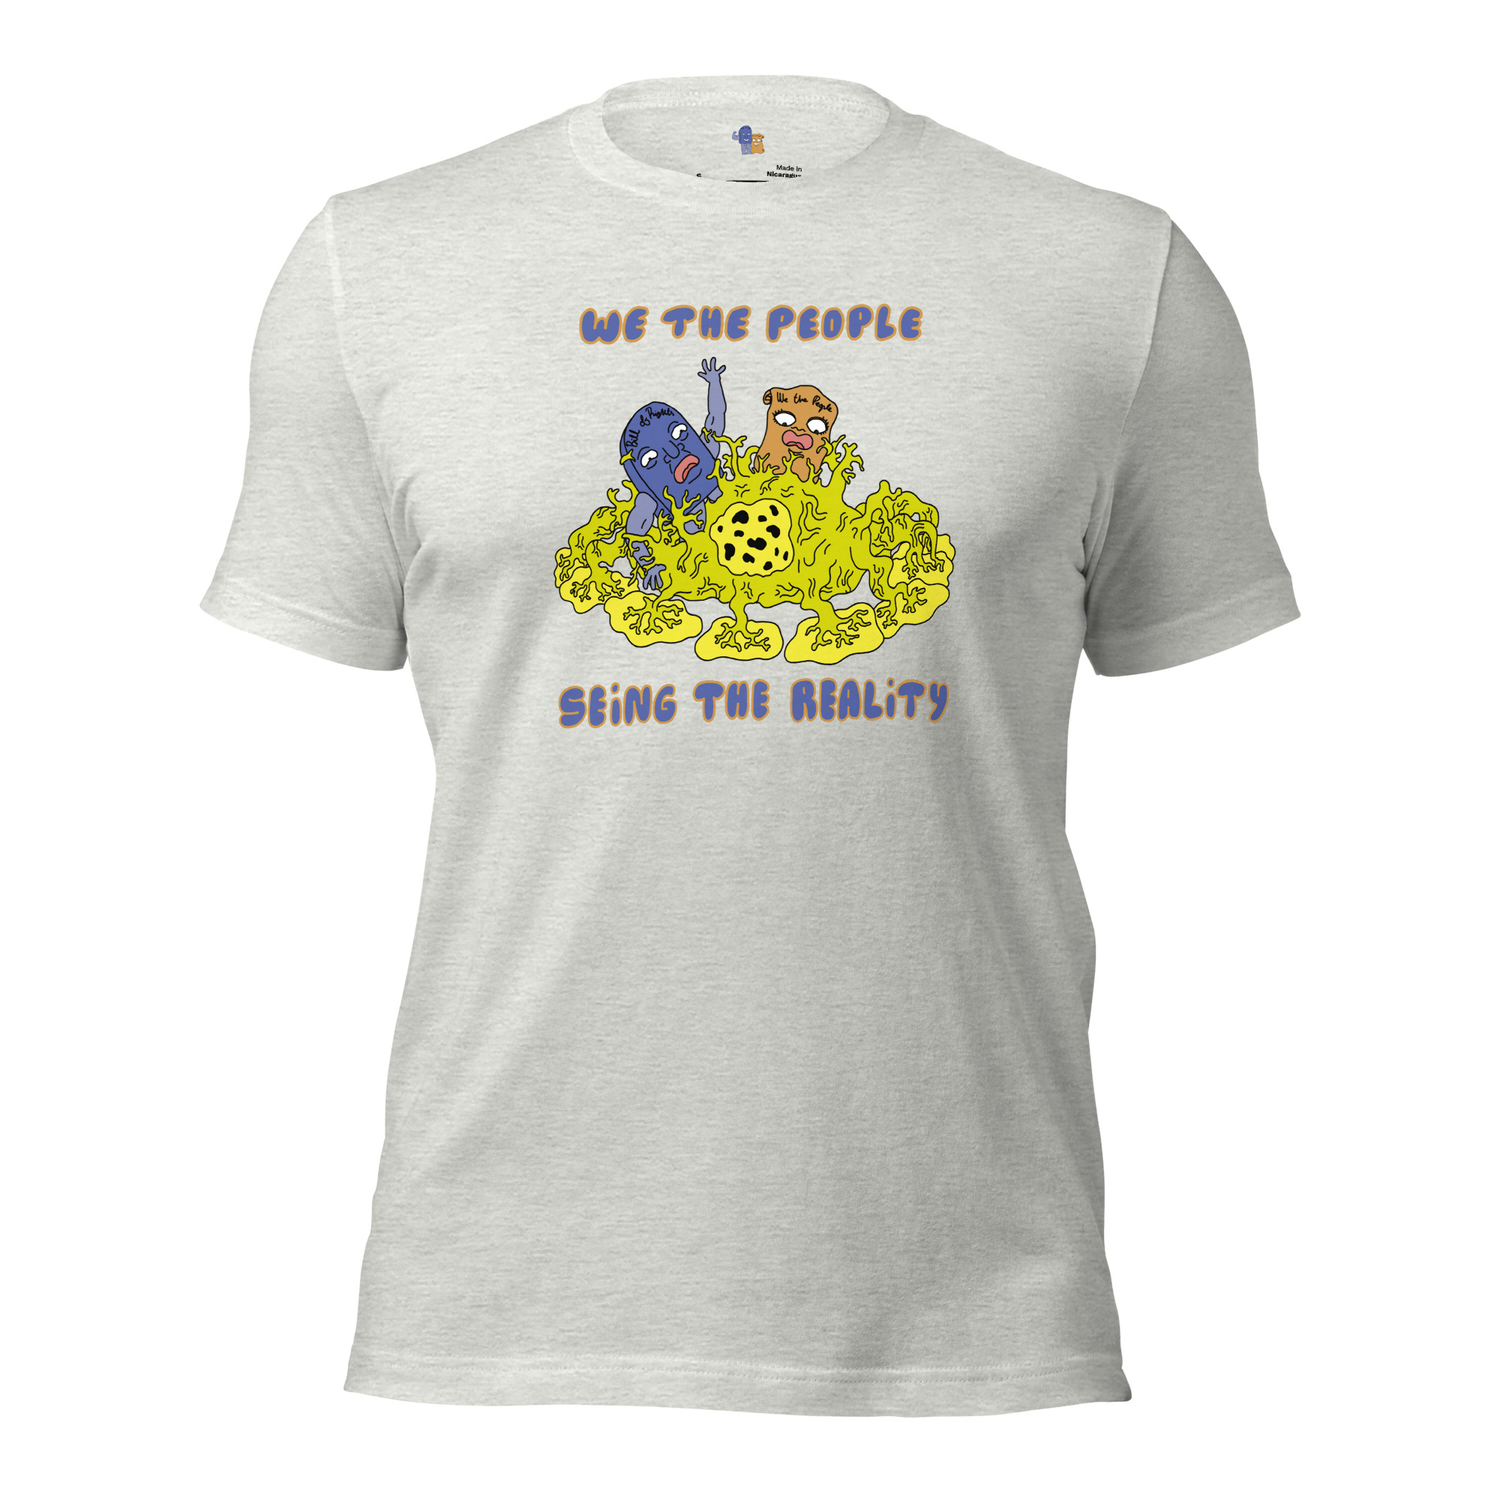 We the People T-Shirt Collection